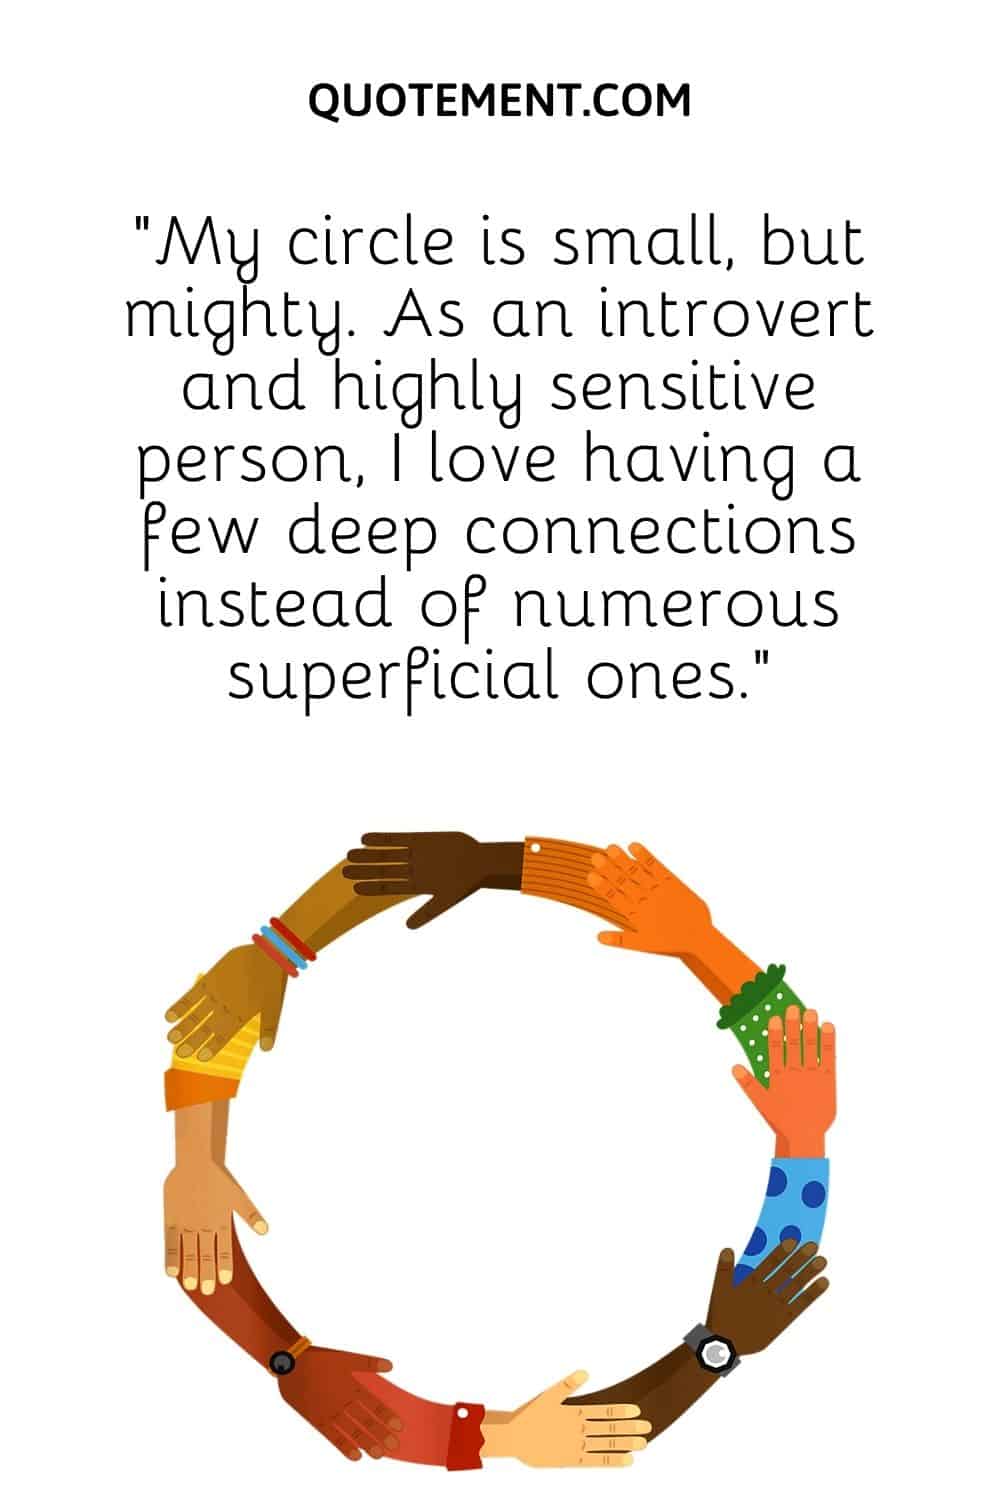 “My circle is small, but mighty. As an introvert and highly sensitive person, I love having a few deep connections instead of numerous superficial ones.”